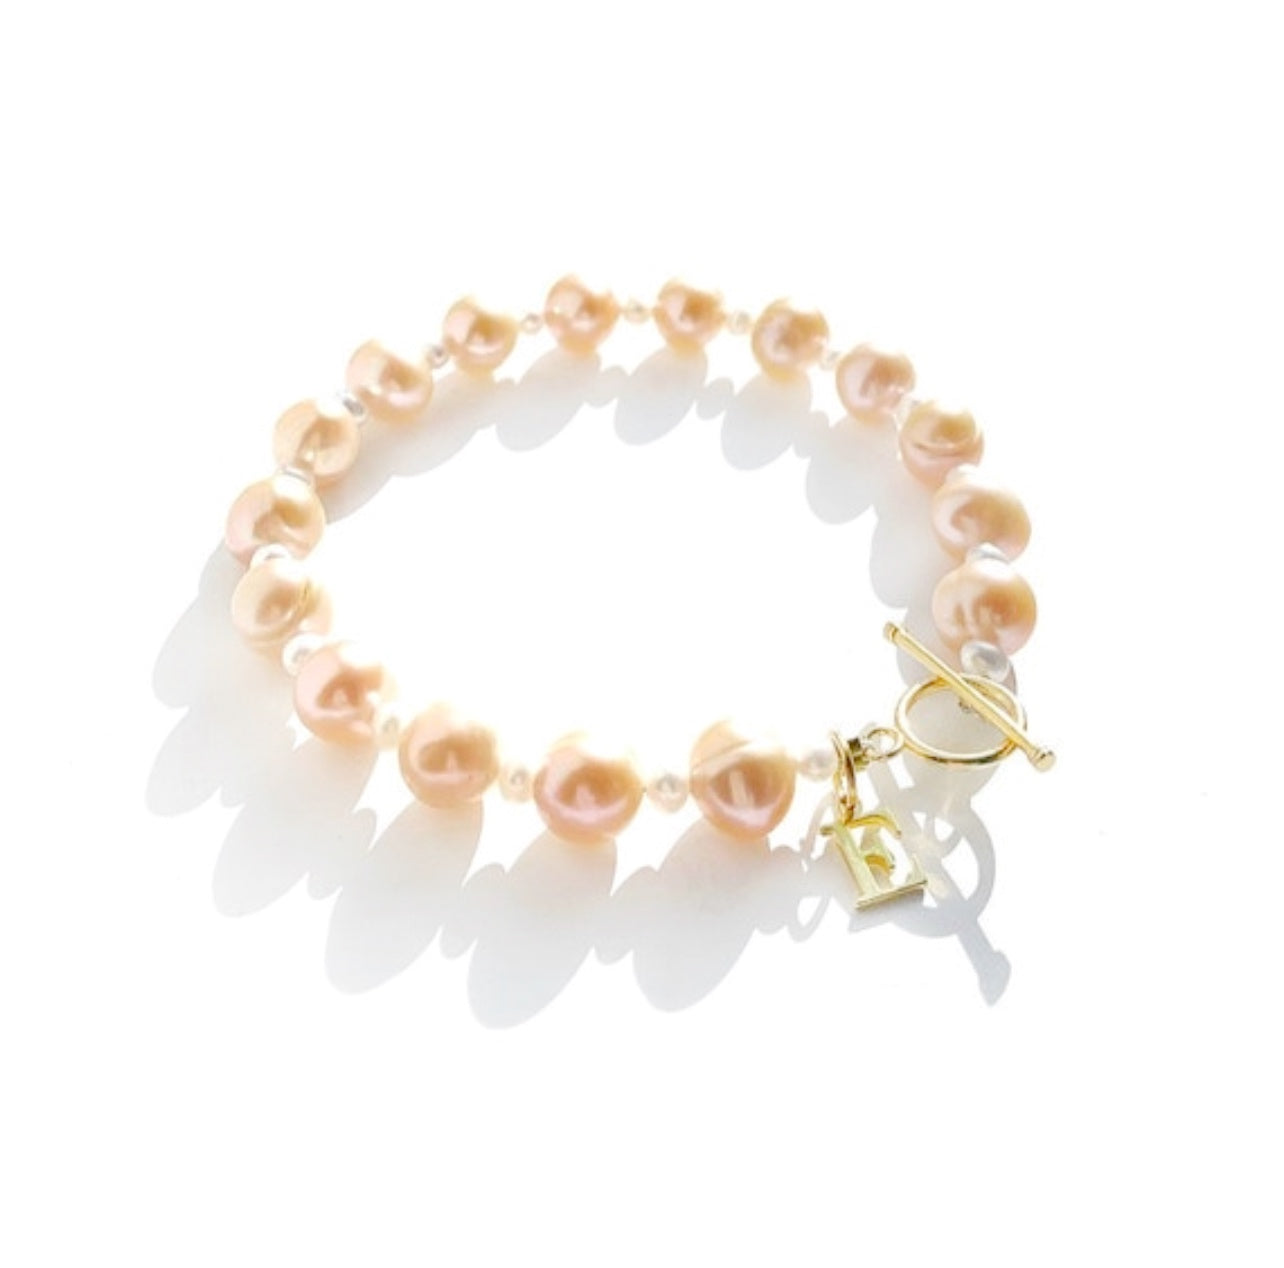 Letter charm bracelet, freshwater peach pearl bracelet with gold vermeil clasp and initial letter charm, personalized jewelry gifts